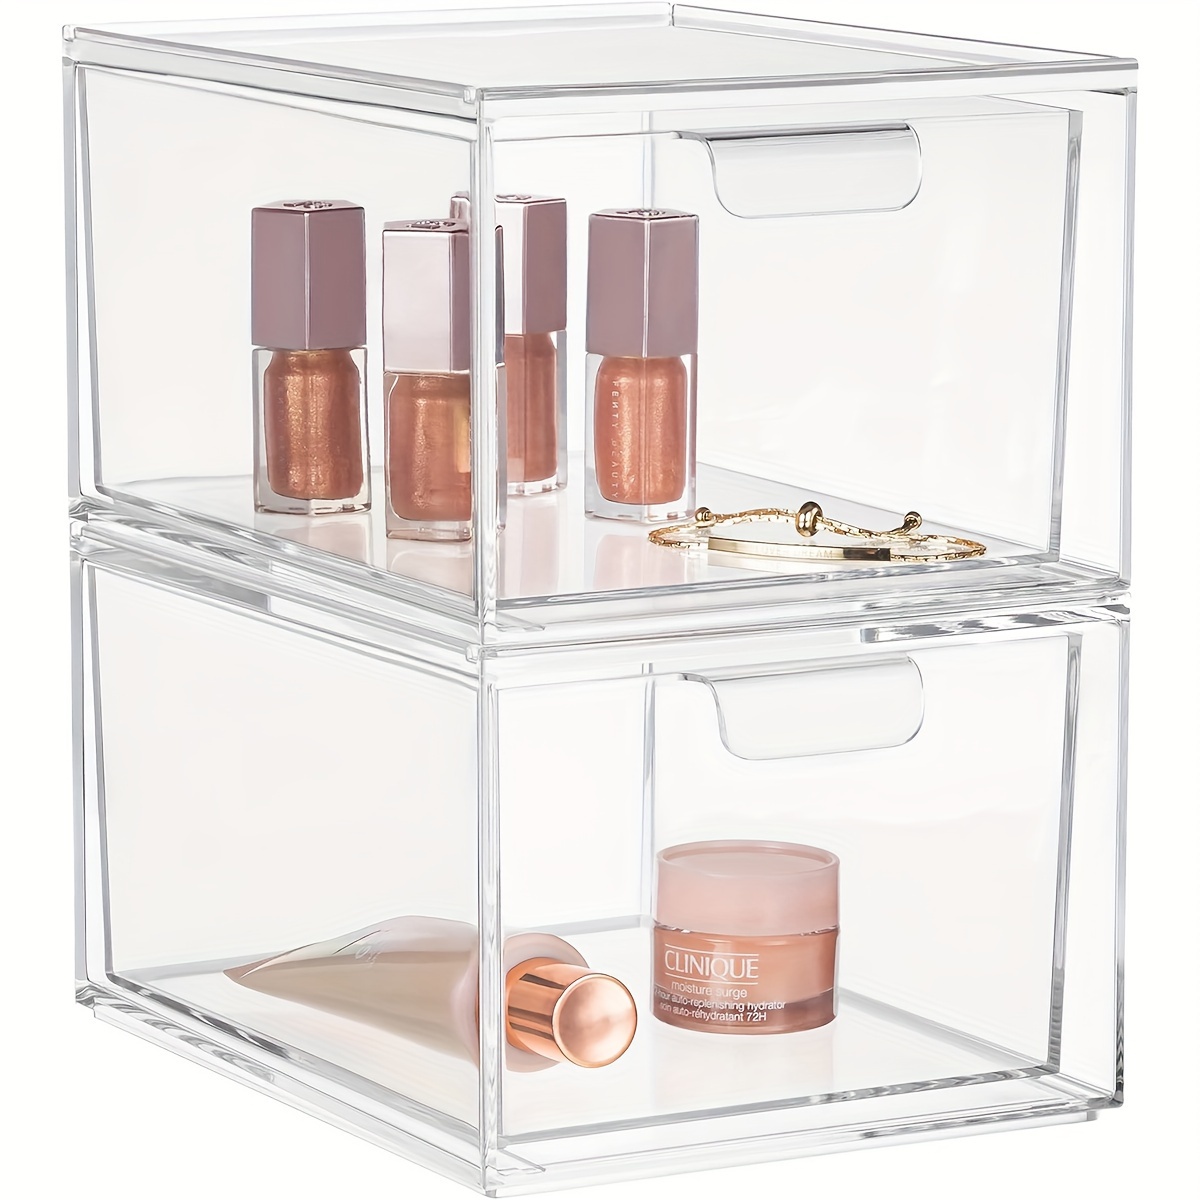 

2pcs Clear Stackable Storage Drawer Acrylic Organizers, 4.5'' Acrylic Bathroom Makeup Organizer, Plastic Storage Bins With Handles For Vanity, Home Organization And Storage